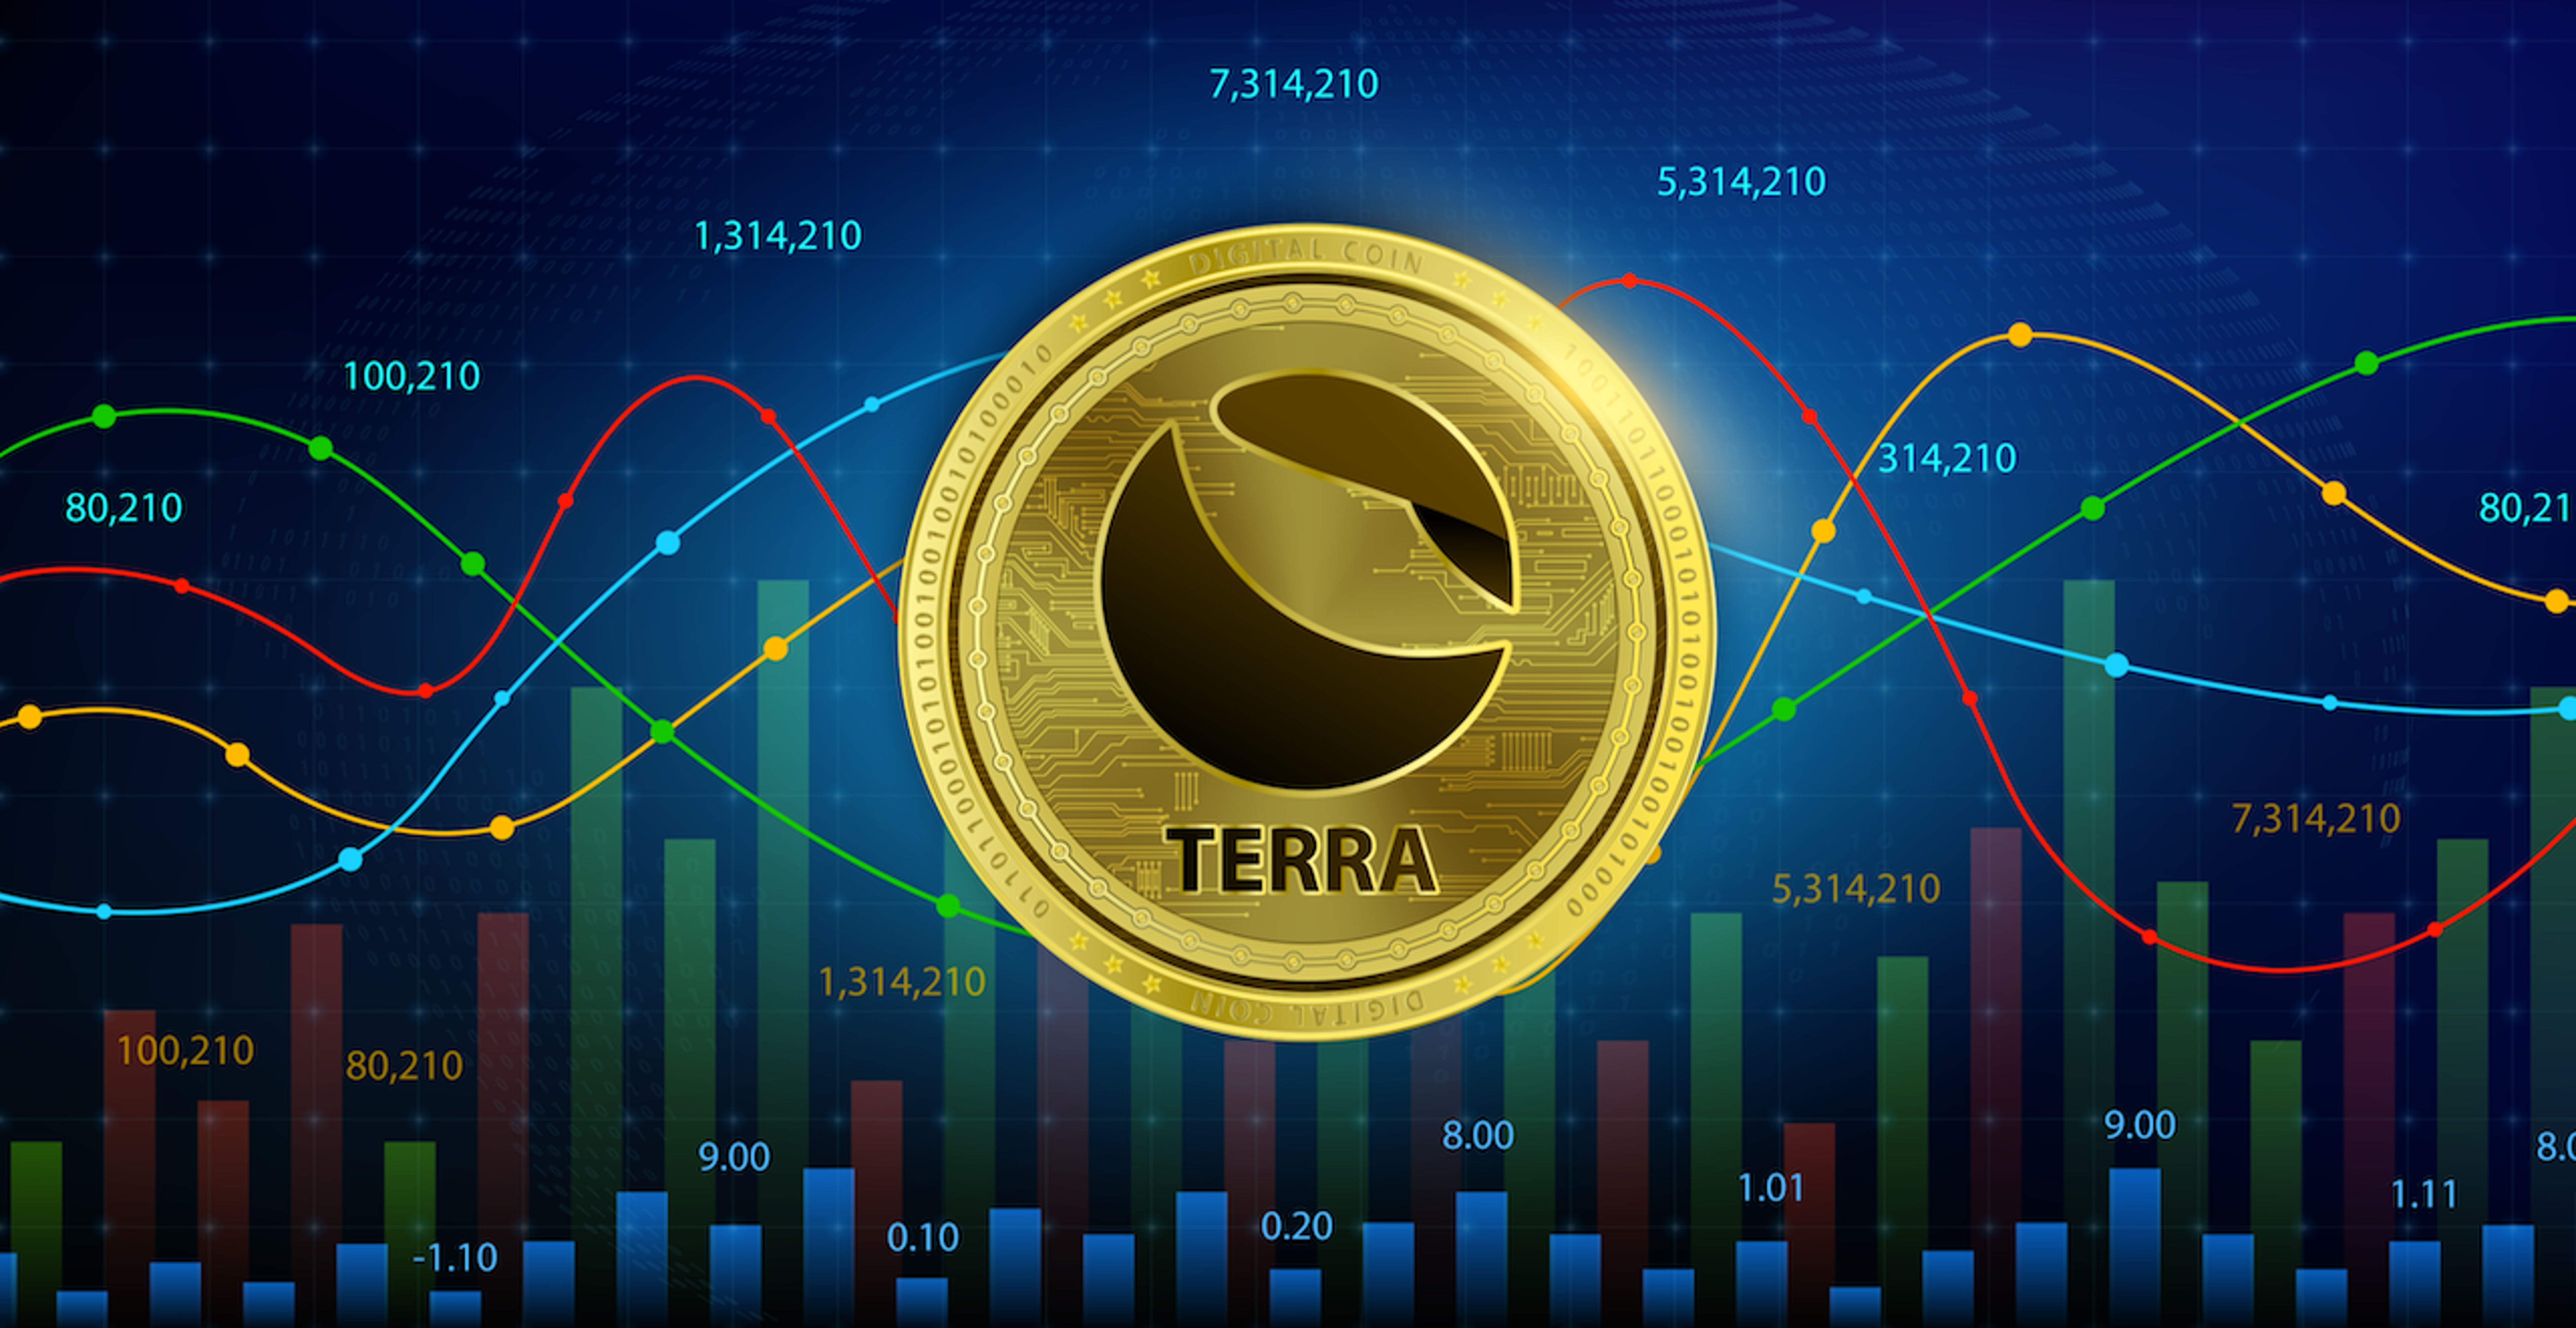 Could Terra&#39;s Stablecoin Struggles Affect The Circle SPAC Deal And Valuation?